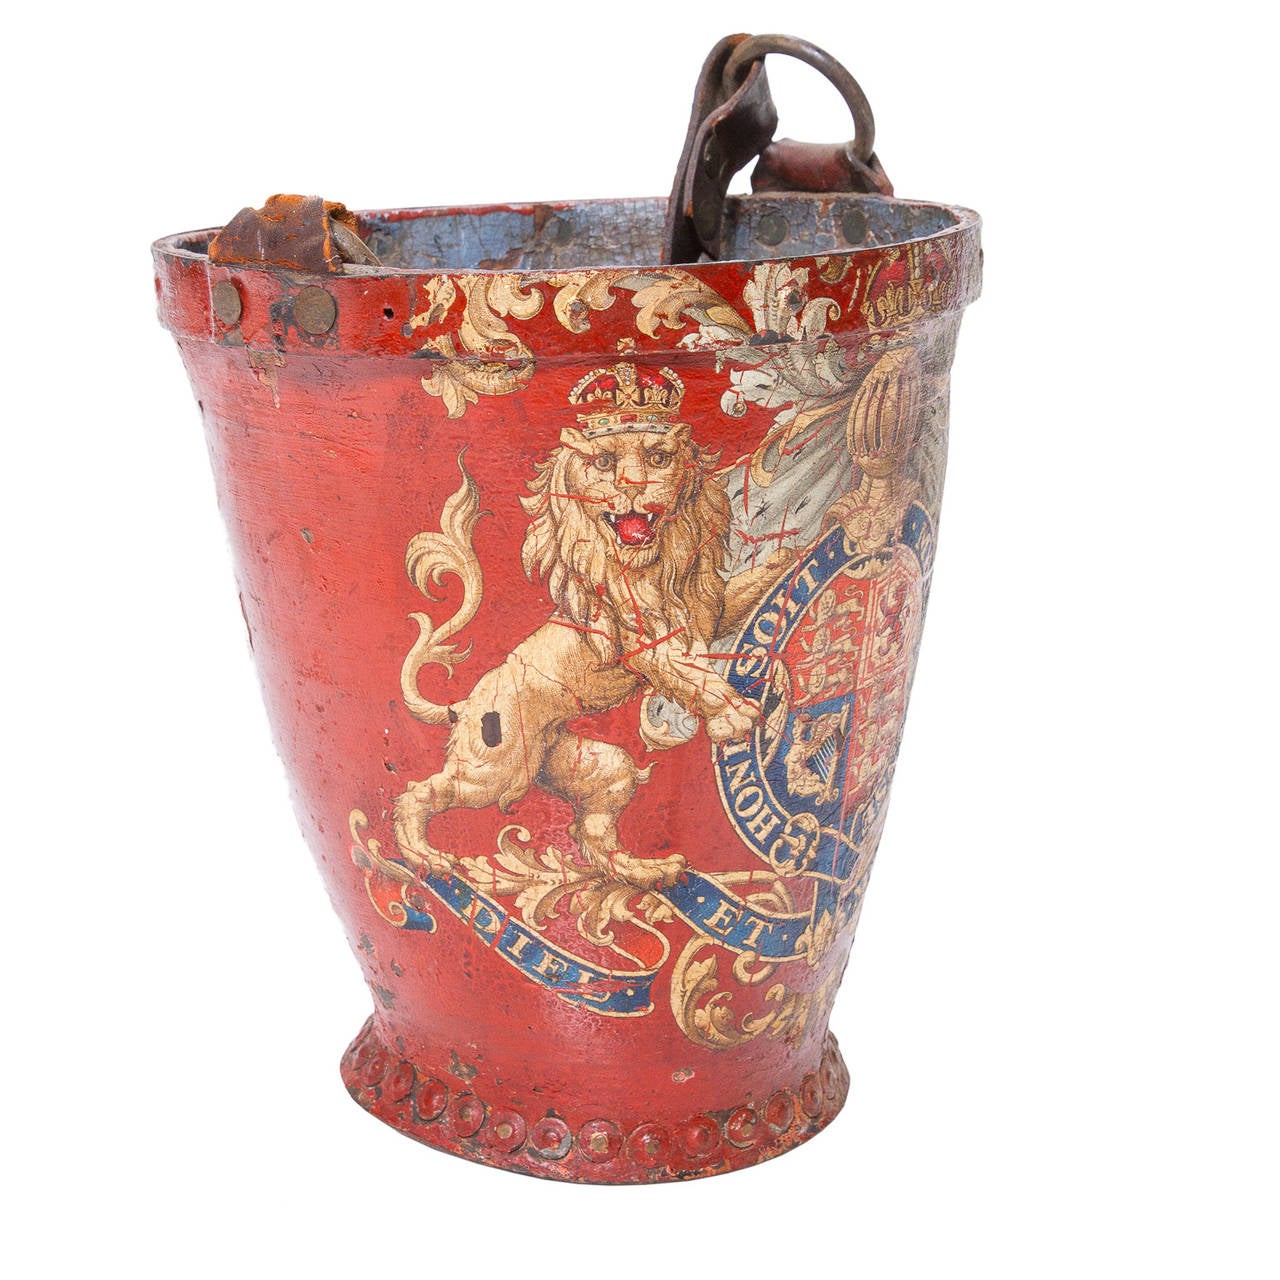 An original 19th century english fire starter bucket wrapped in leather and painted red with the Queen Elizebeth II coat of Arms. There is a leather strap for carrying and connected by two iron rings. These to me are great collectables. Makes a